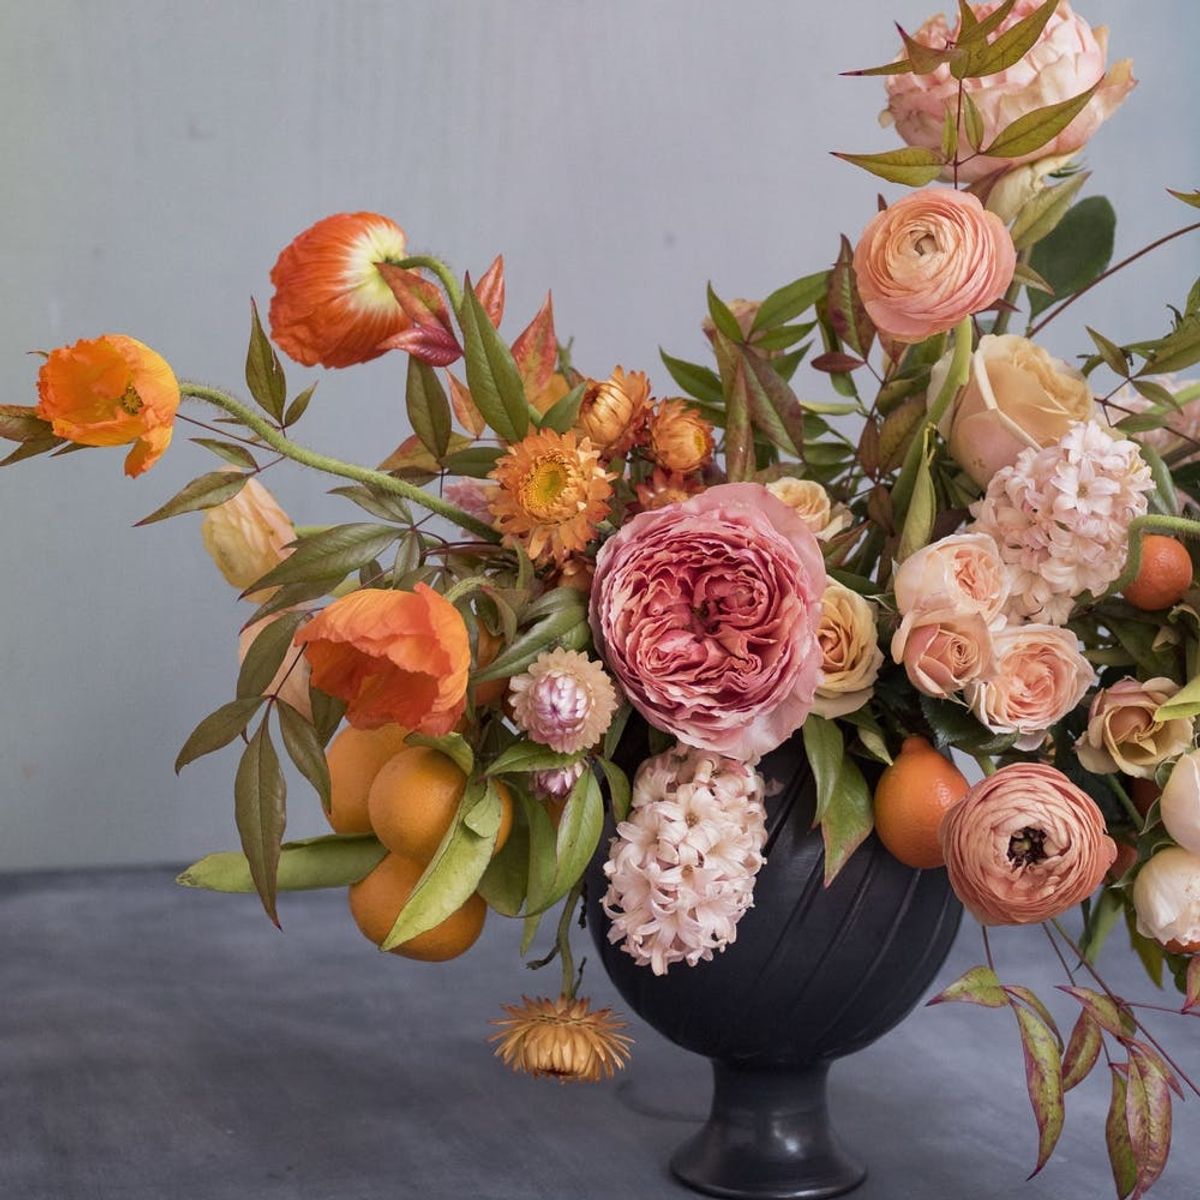 4 Pro Tips for Creating Beautiful Floral Arrangements